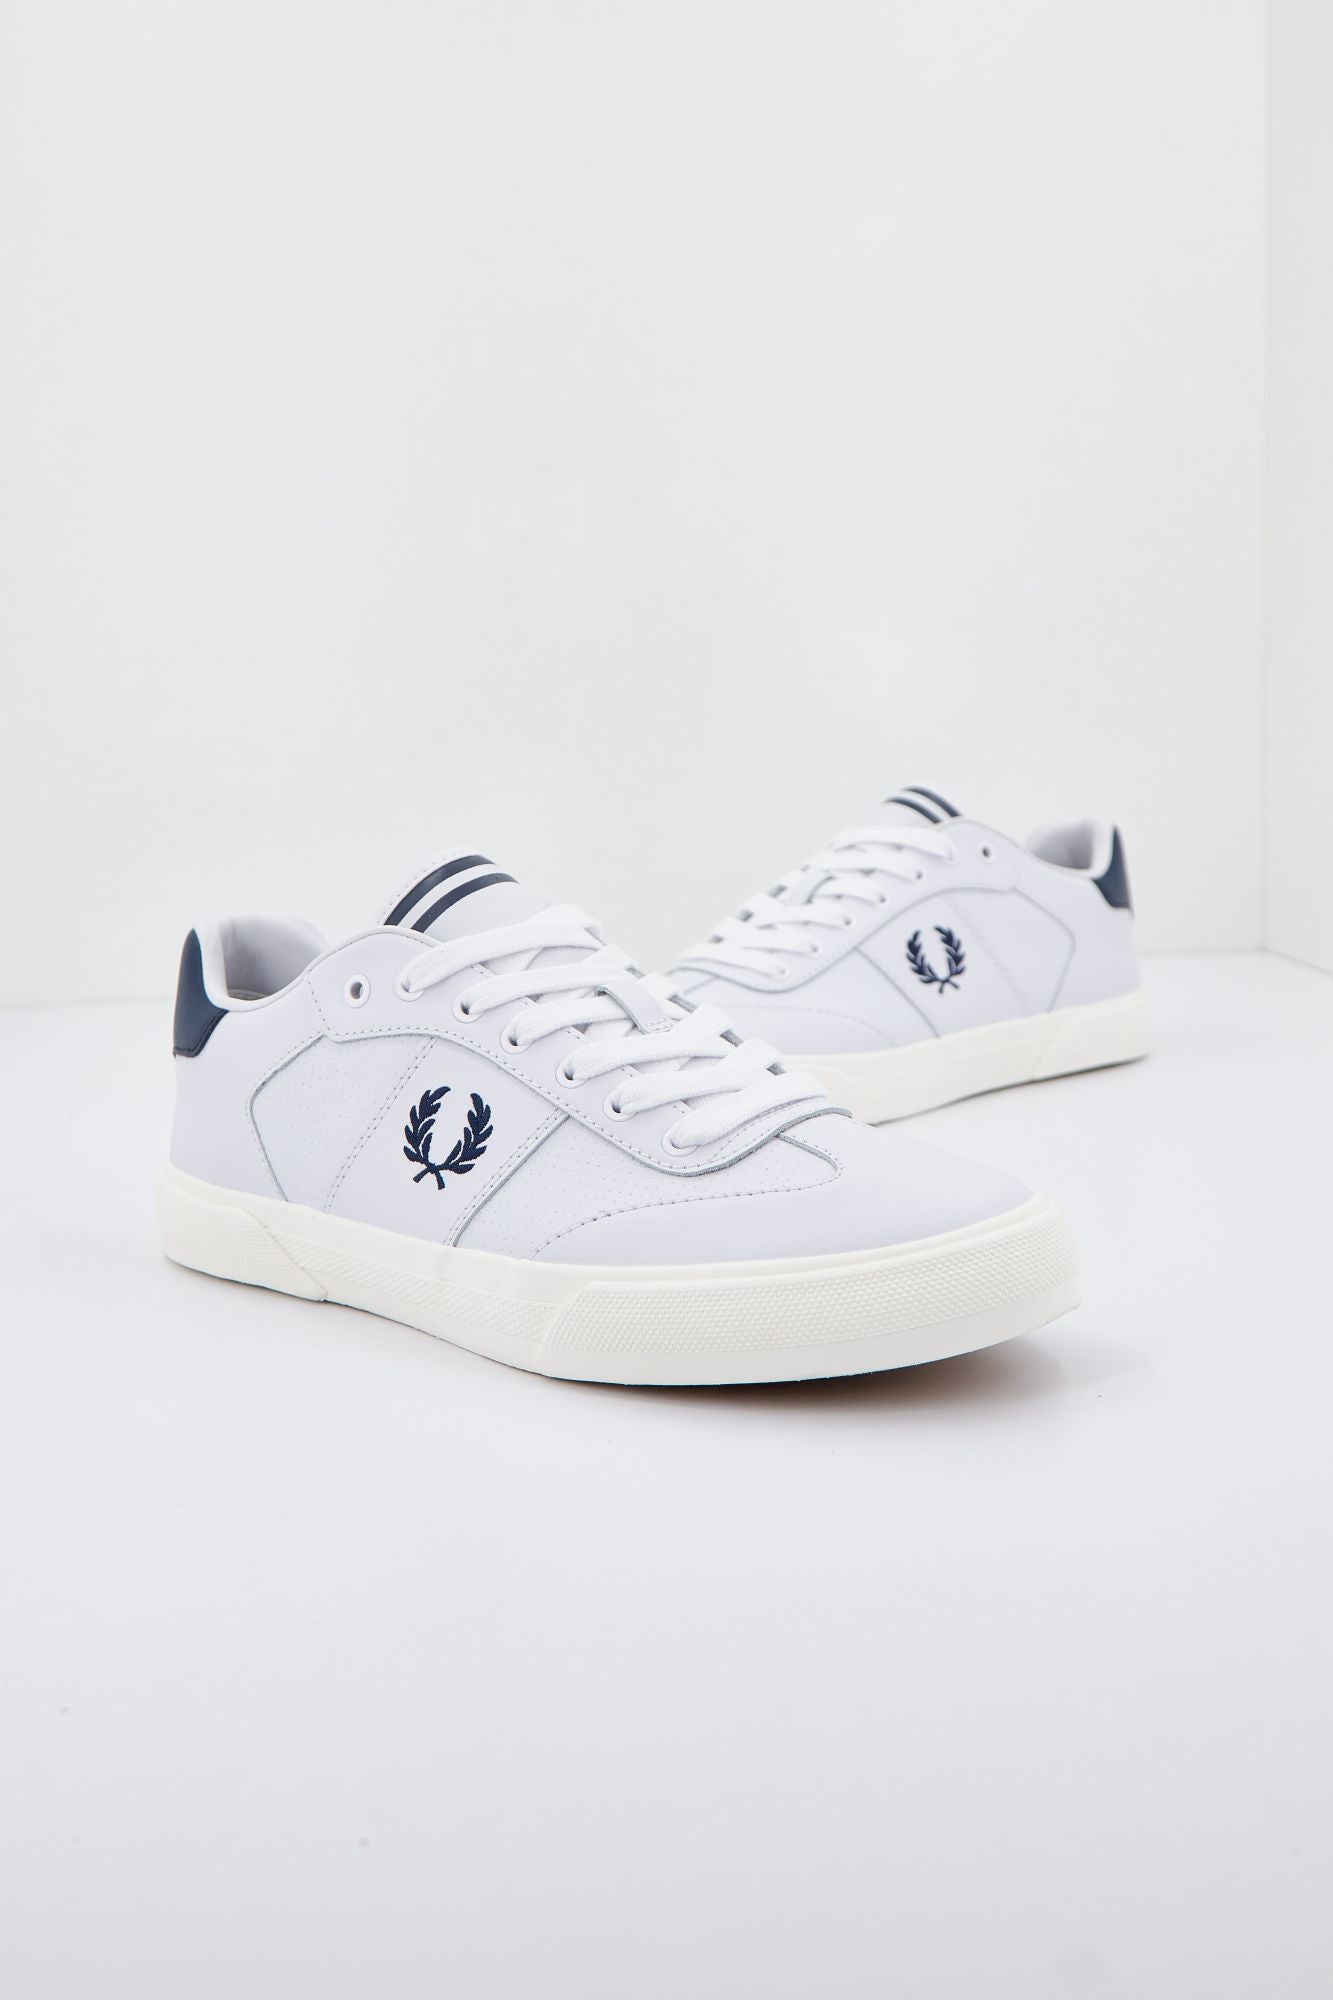 FRED PERRY CLAY PERF LEATHER en color BLANCO (1)